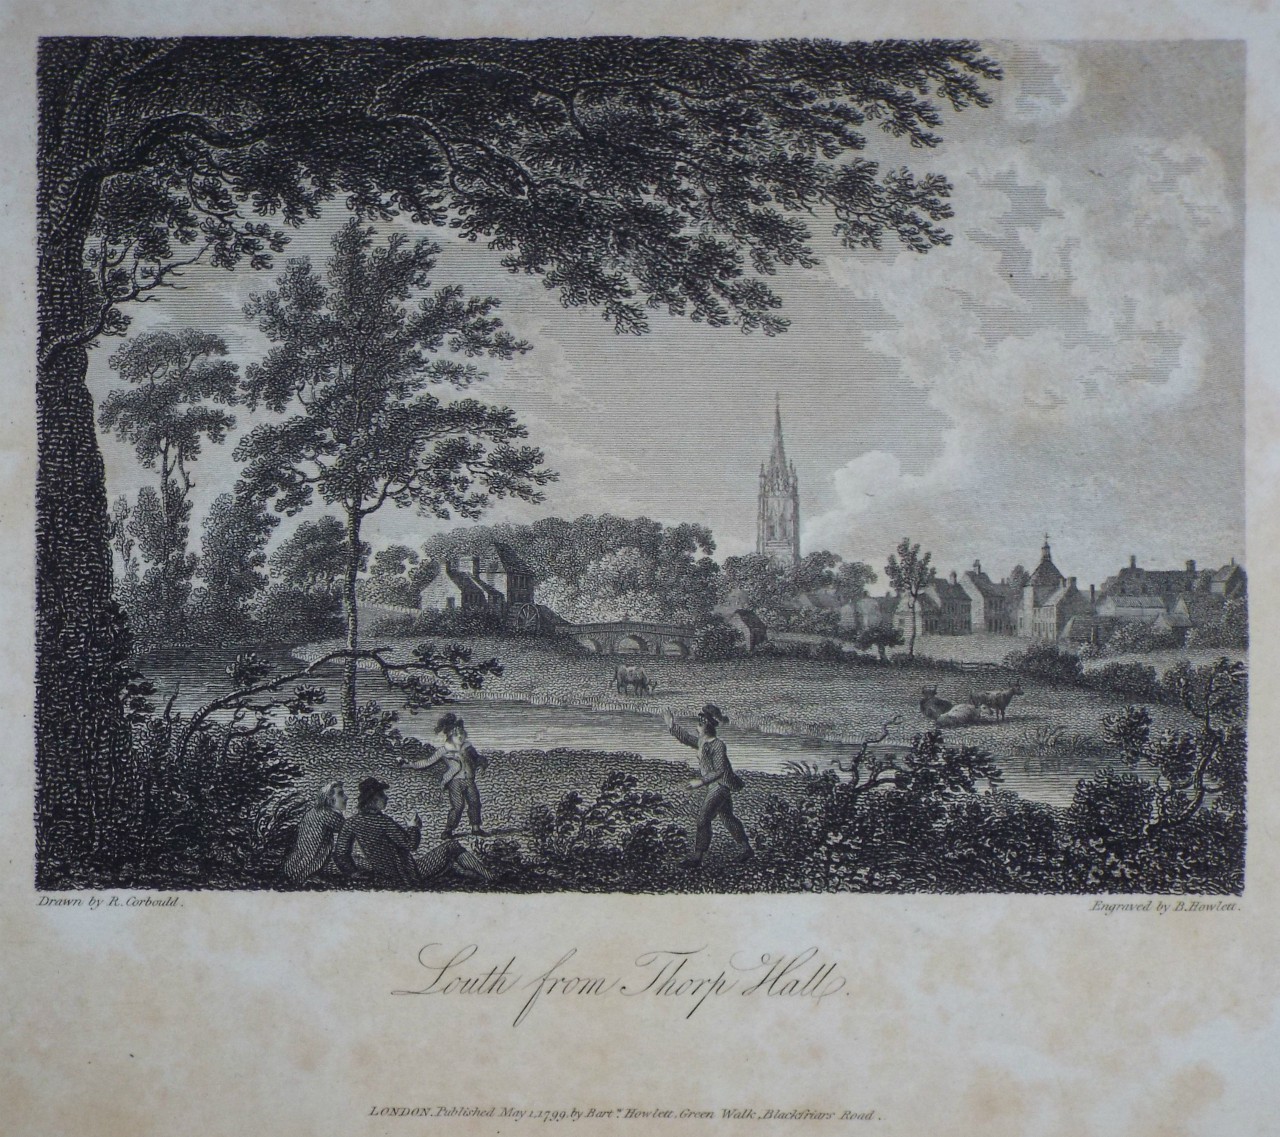 Print - Louth from Thorp Hall. - Howlett